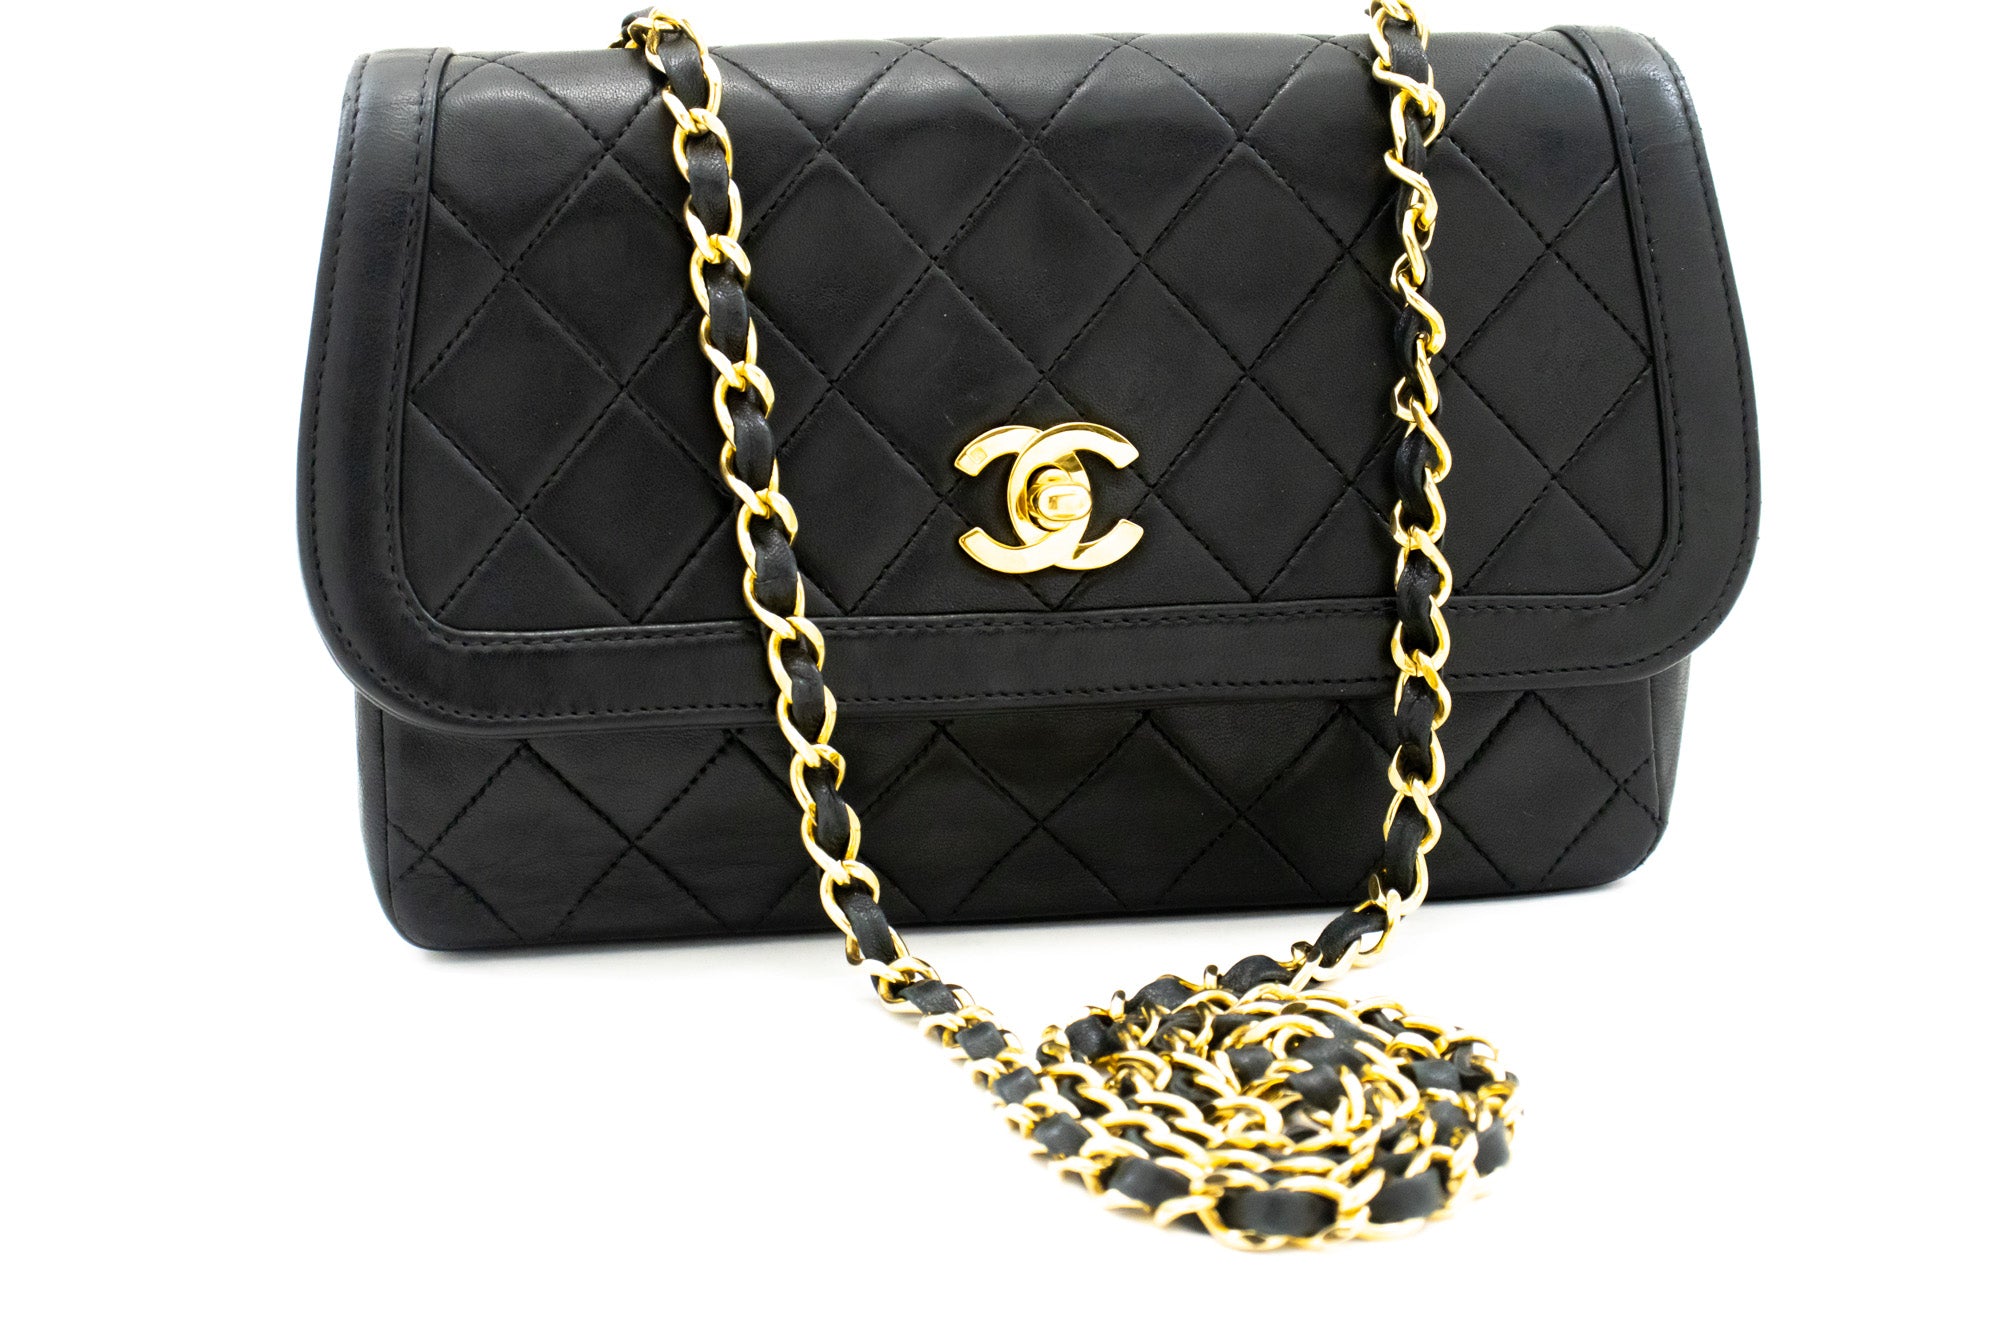 CHANEL VINTAGE CC TURNLOCK RED QUILTED SATIN GOLD CHAIN SHOULDER